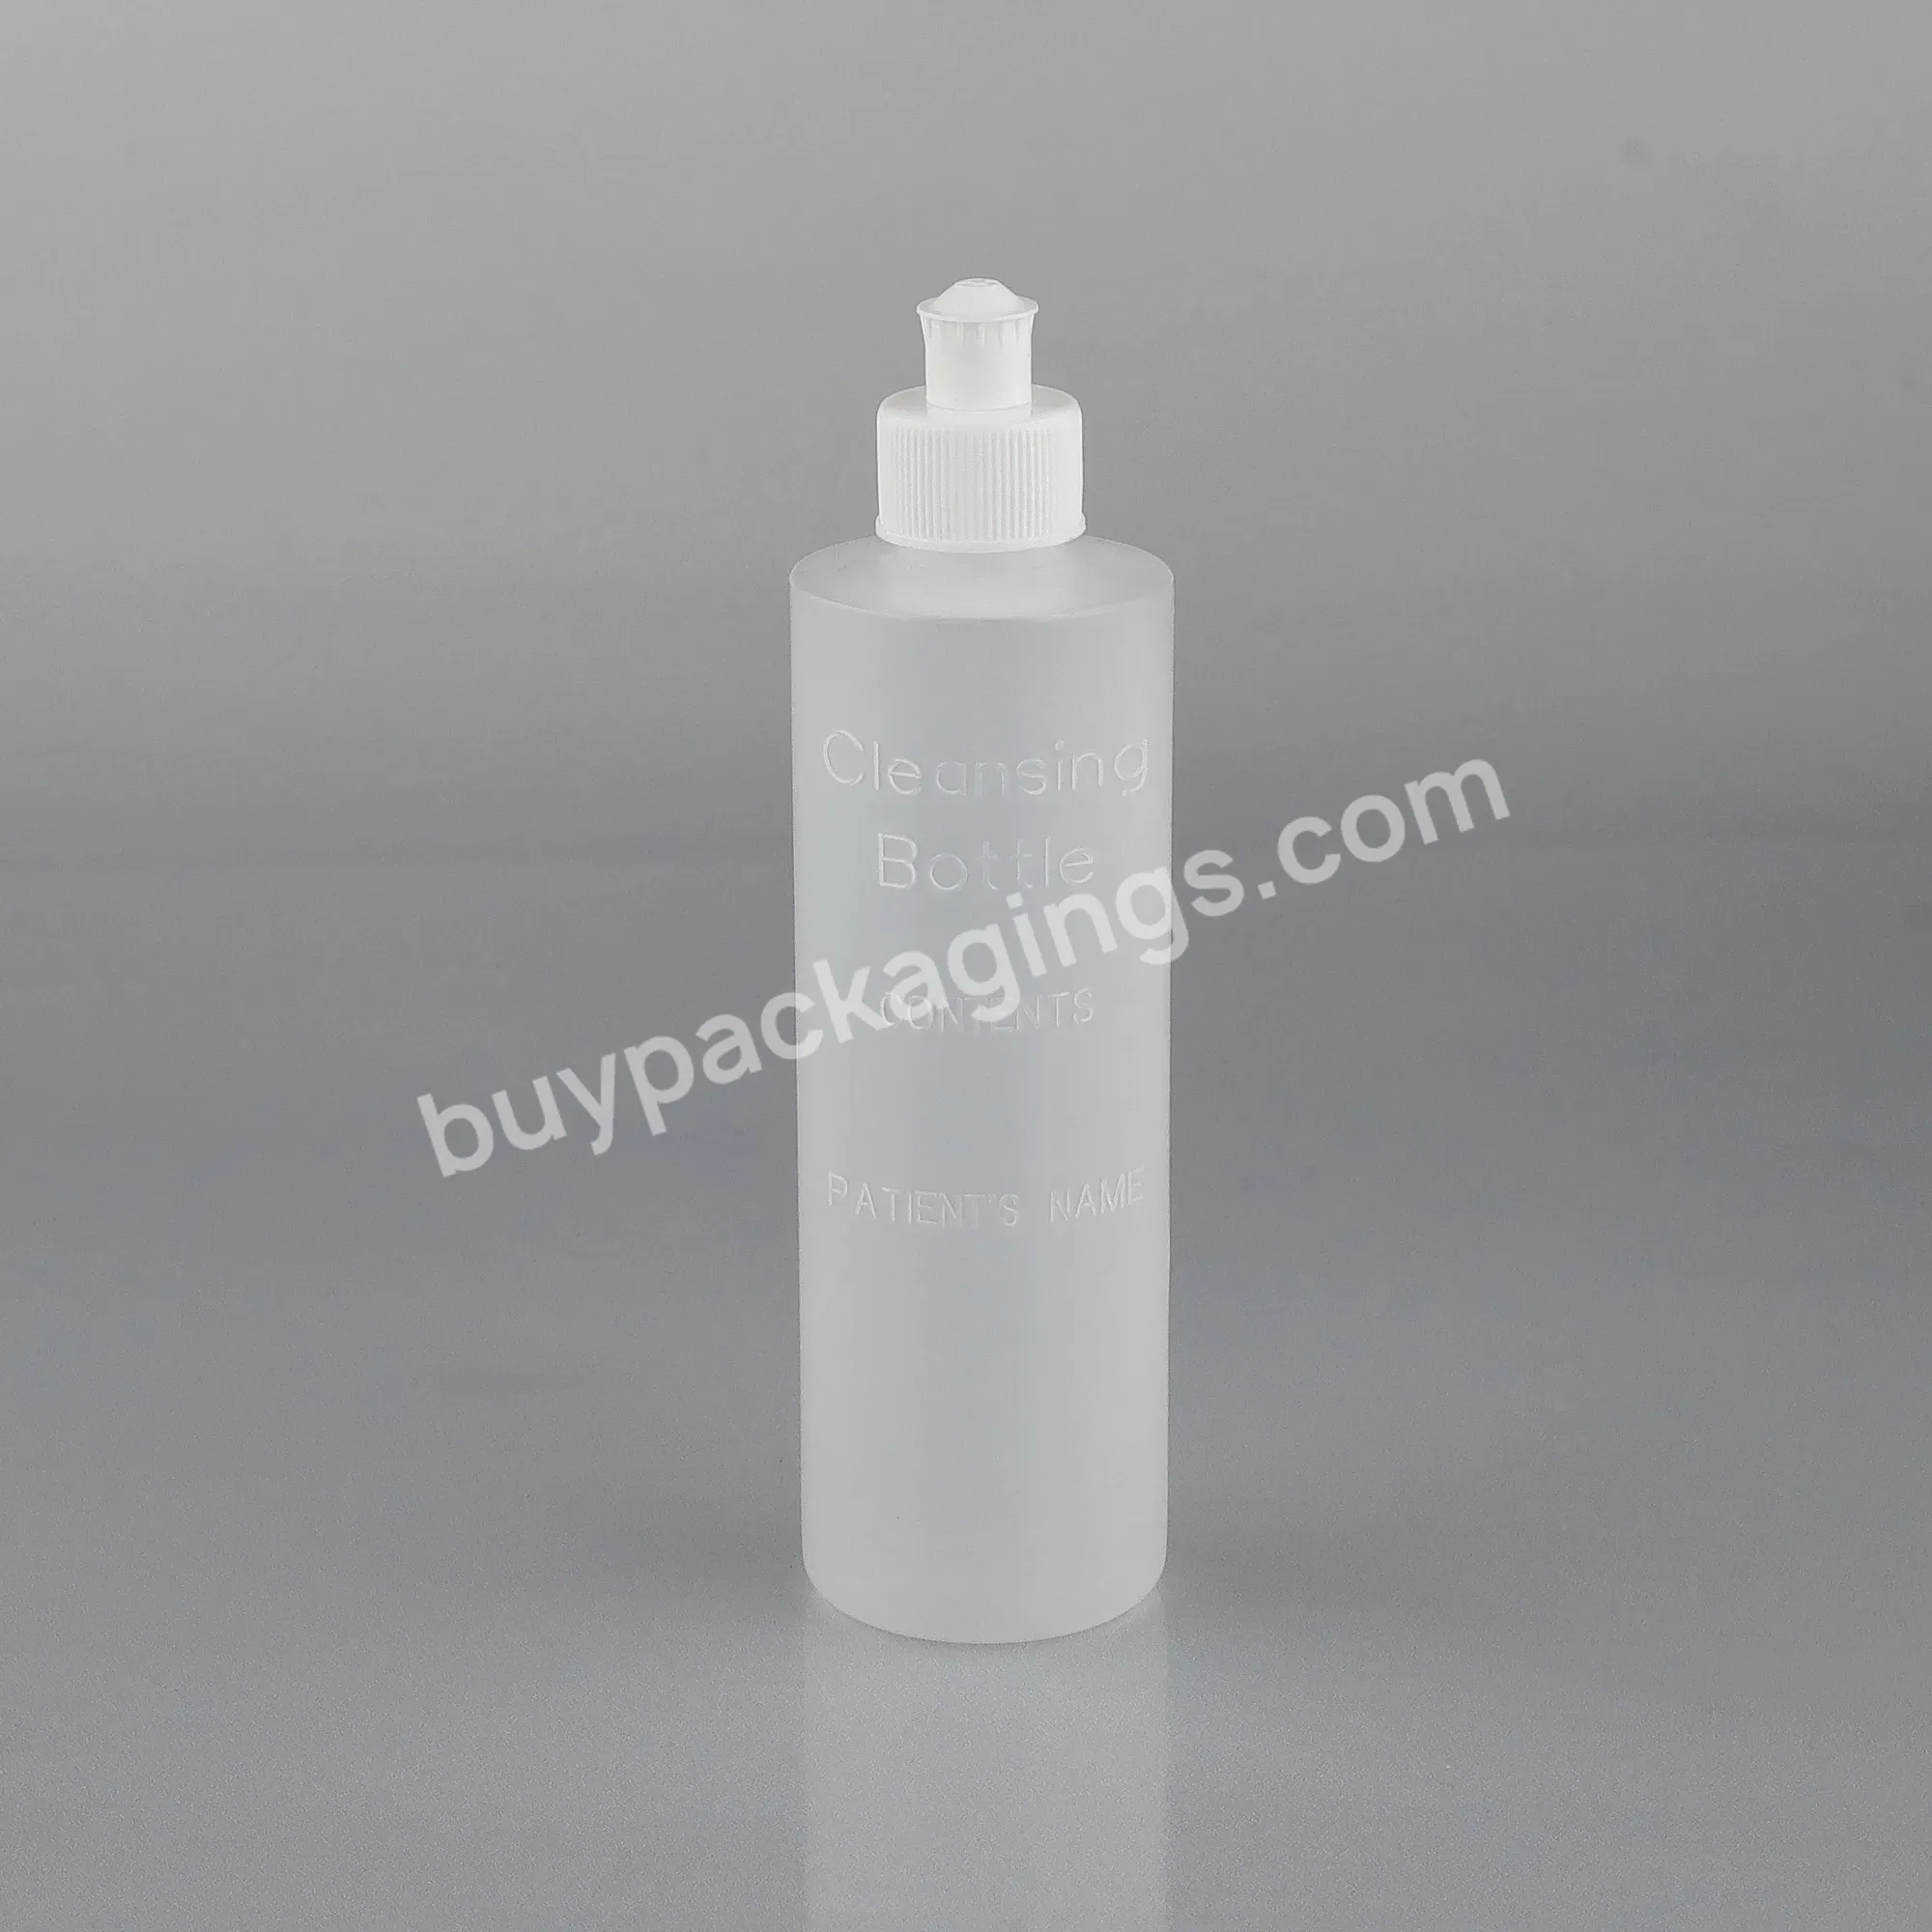 Disposable 8oz Ldpe Perineal Cleansing Bottle Postpartum Perineal Irrigation Squirt Bottle With Lid - Buy Irrigation Squirt Bottle,Perineal Cleansing Bottle,8oz Cleansing Bottle.